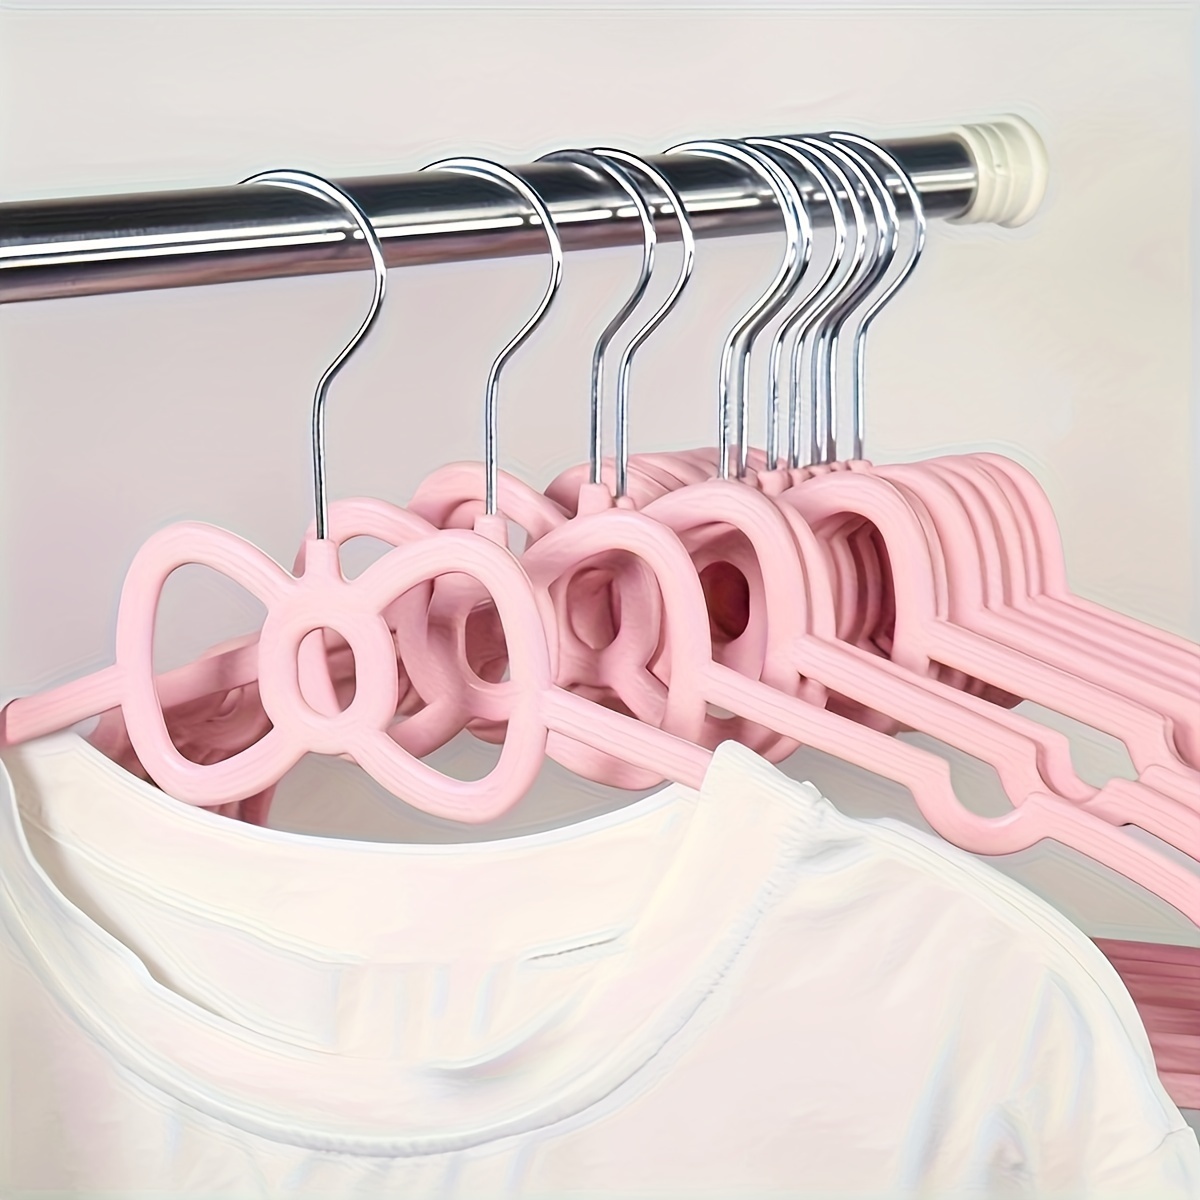 

3pcs/6pcs/9pcs-hanger Clothes Hangers For Clothes, Closets, Coats And Shirts - Heavy Duty, Thick, Tough And Space Saving - For Daily Standard Use, Room Essentials